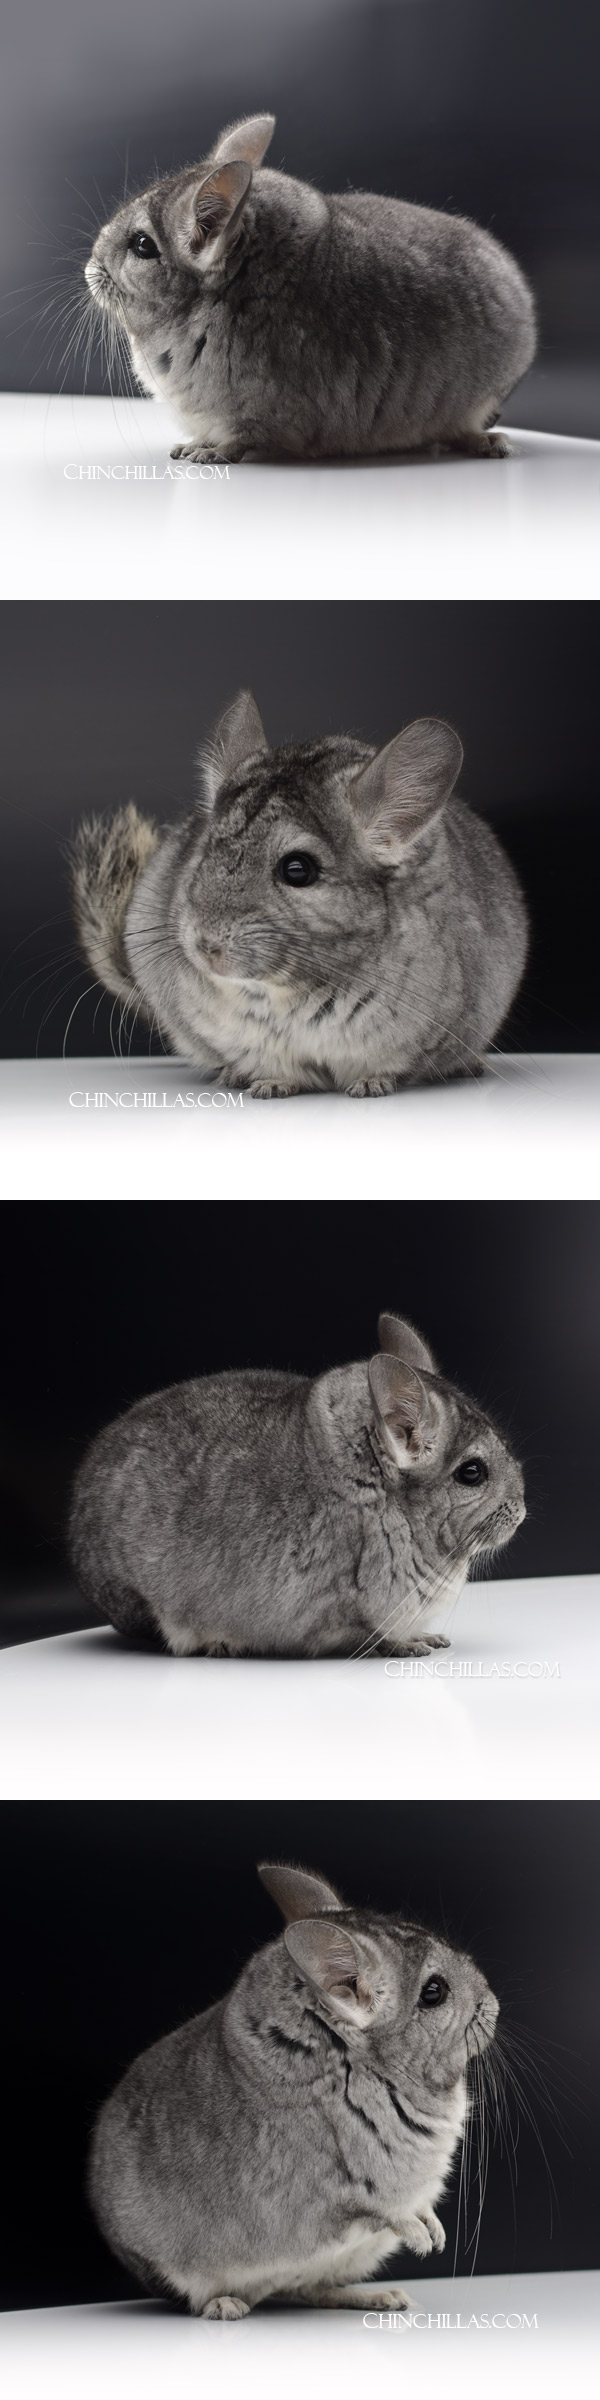 Chinchilla or related item offered for sale or export on Chinchillas.com - 000045 Large Blocky Standard (Royal Persian Angora Carrier) Female Chinchilla